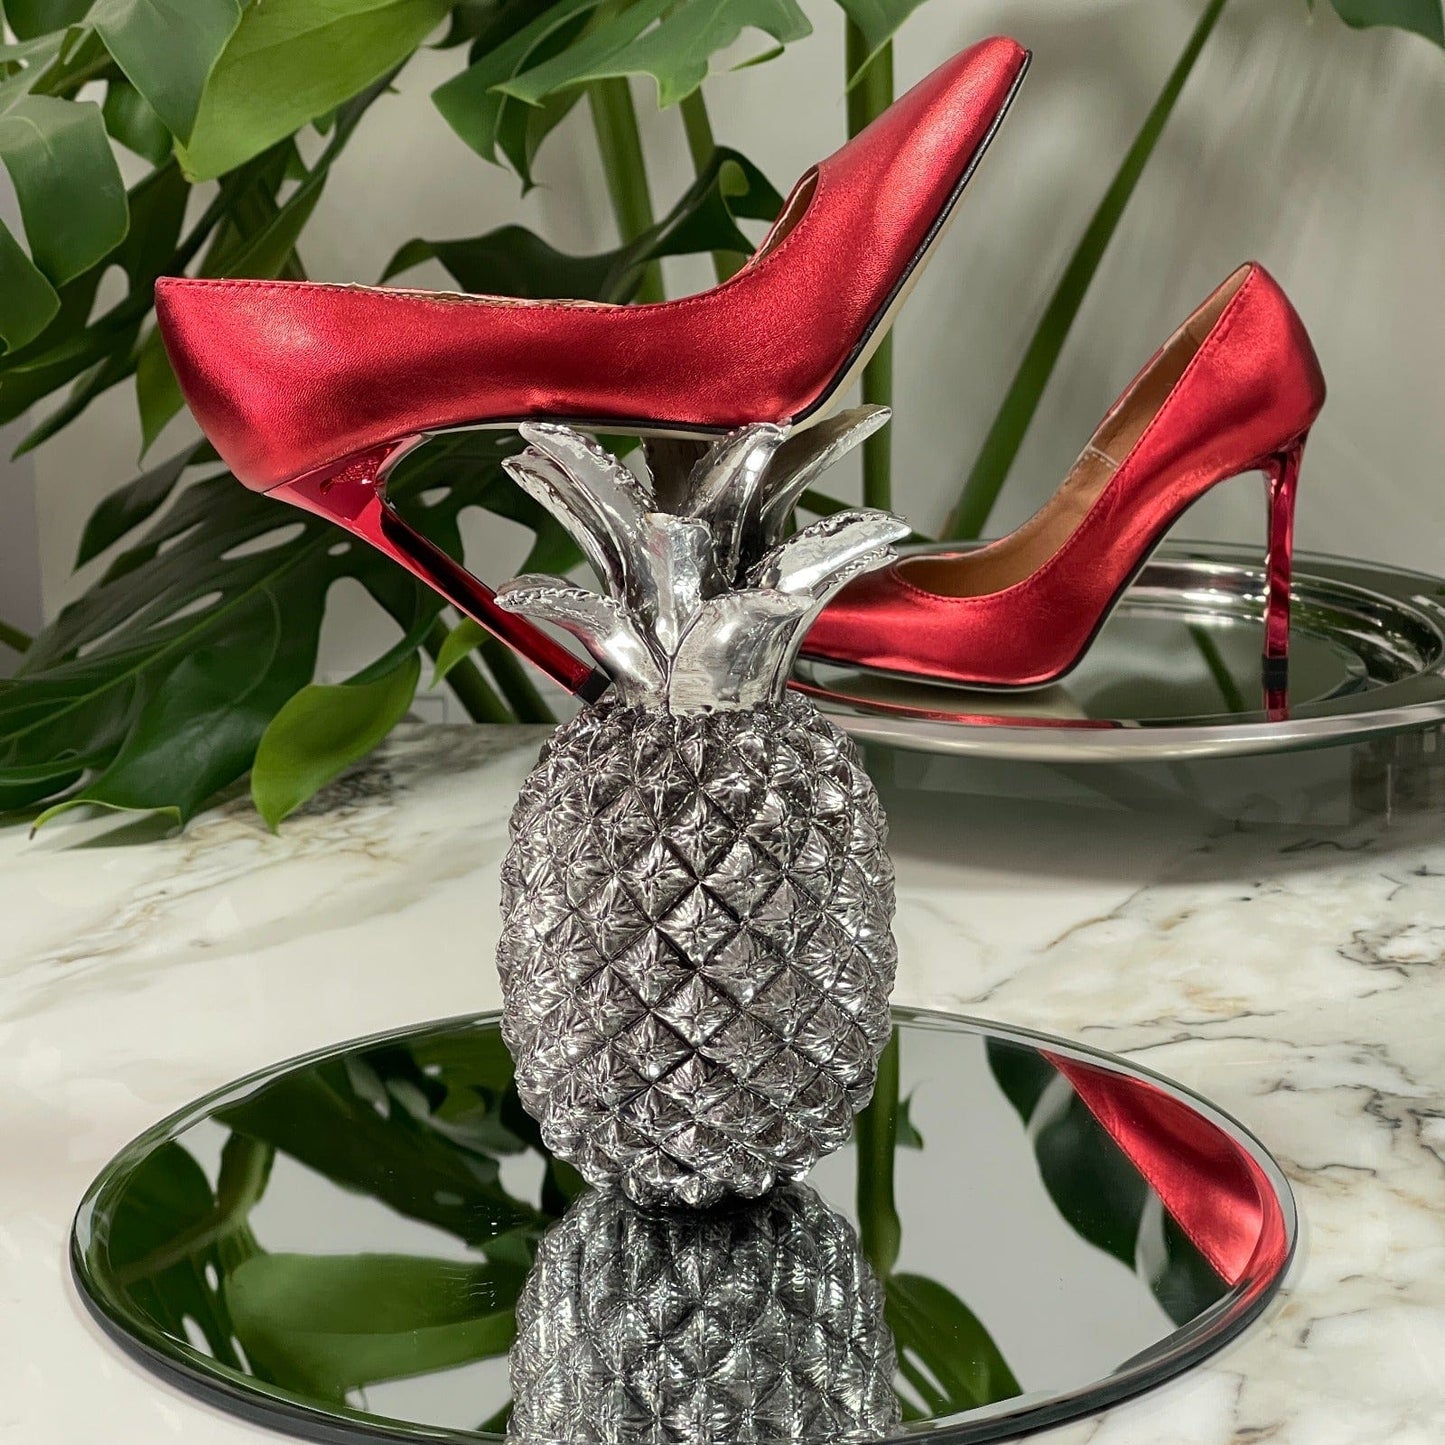 Pointed toe small size court heels in metallic red leather